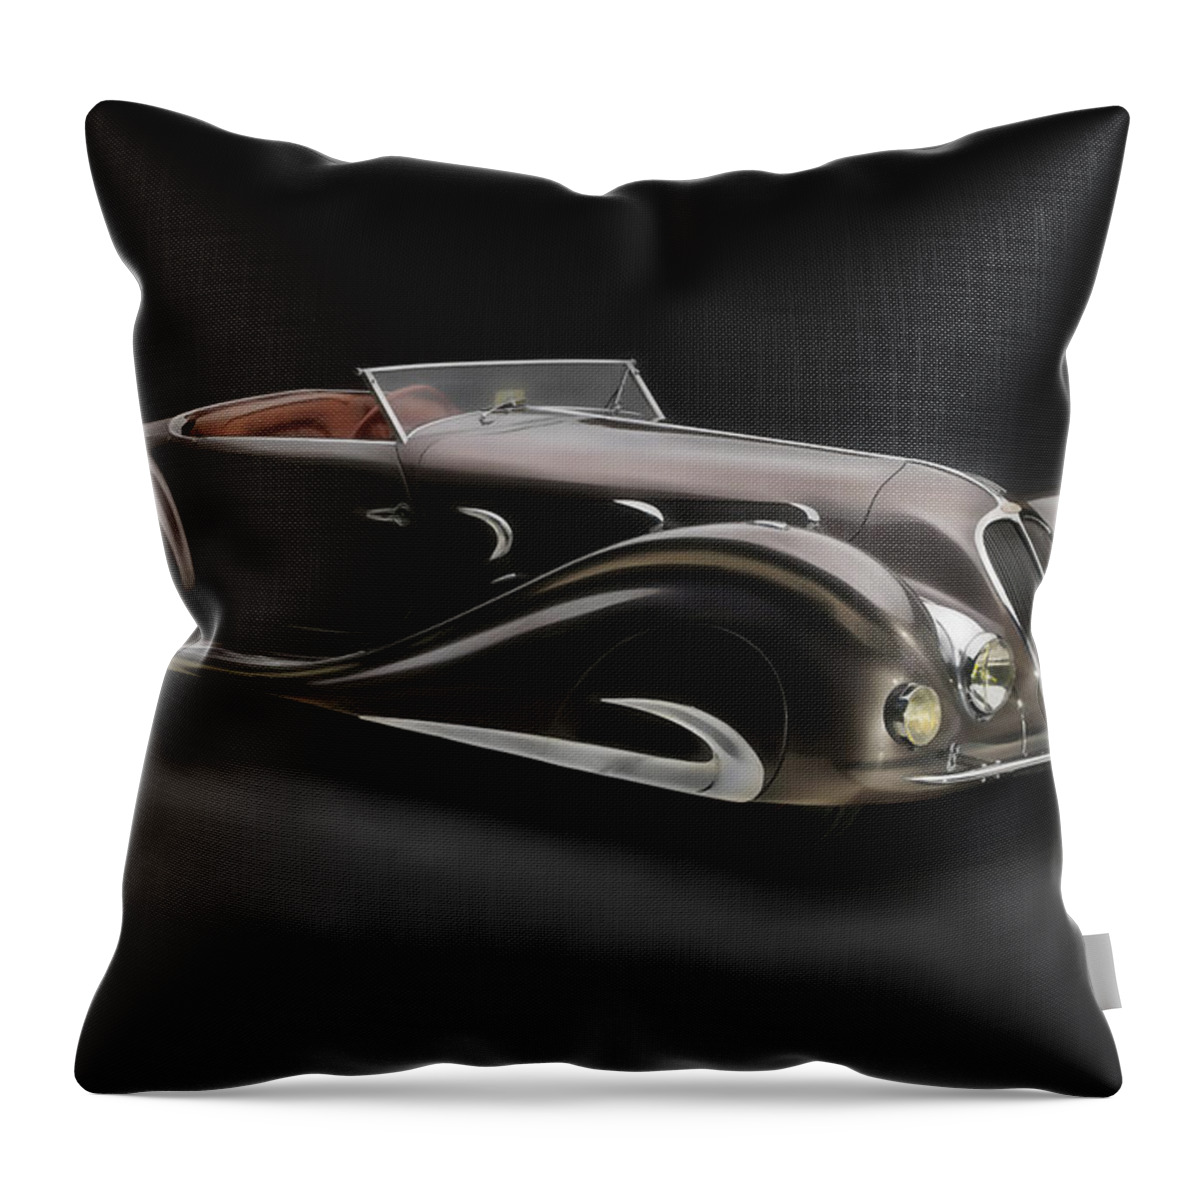 Delahaye Throw Pillow featuring the digital art Delahaye 1930's Art In Motion by Marvin Blaine